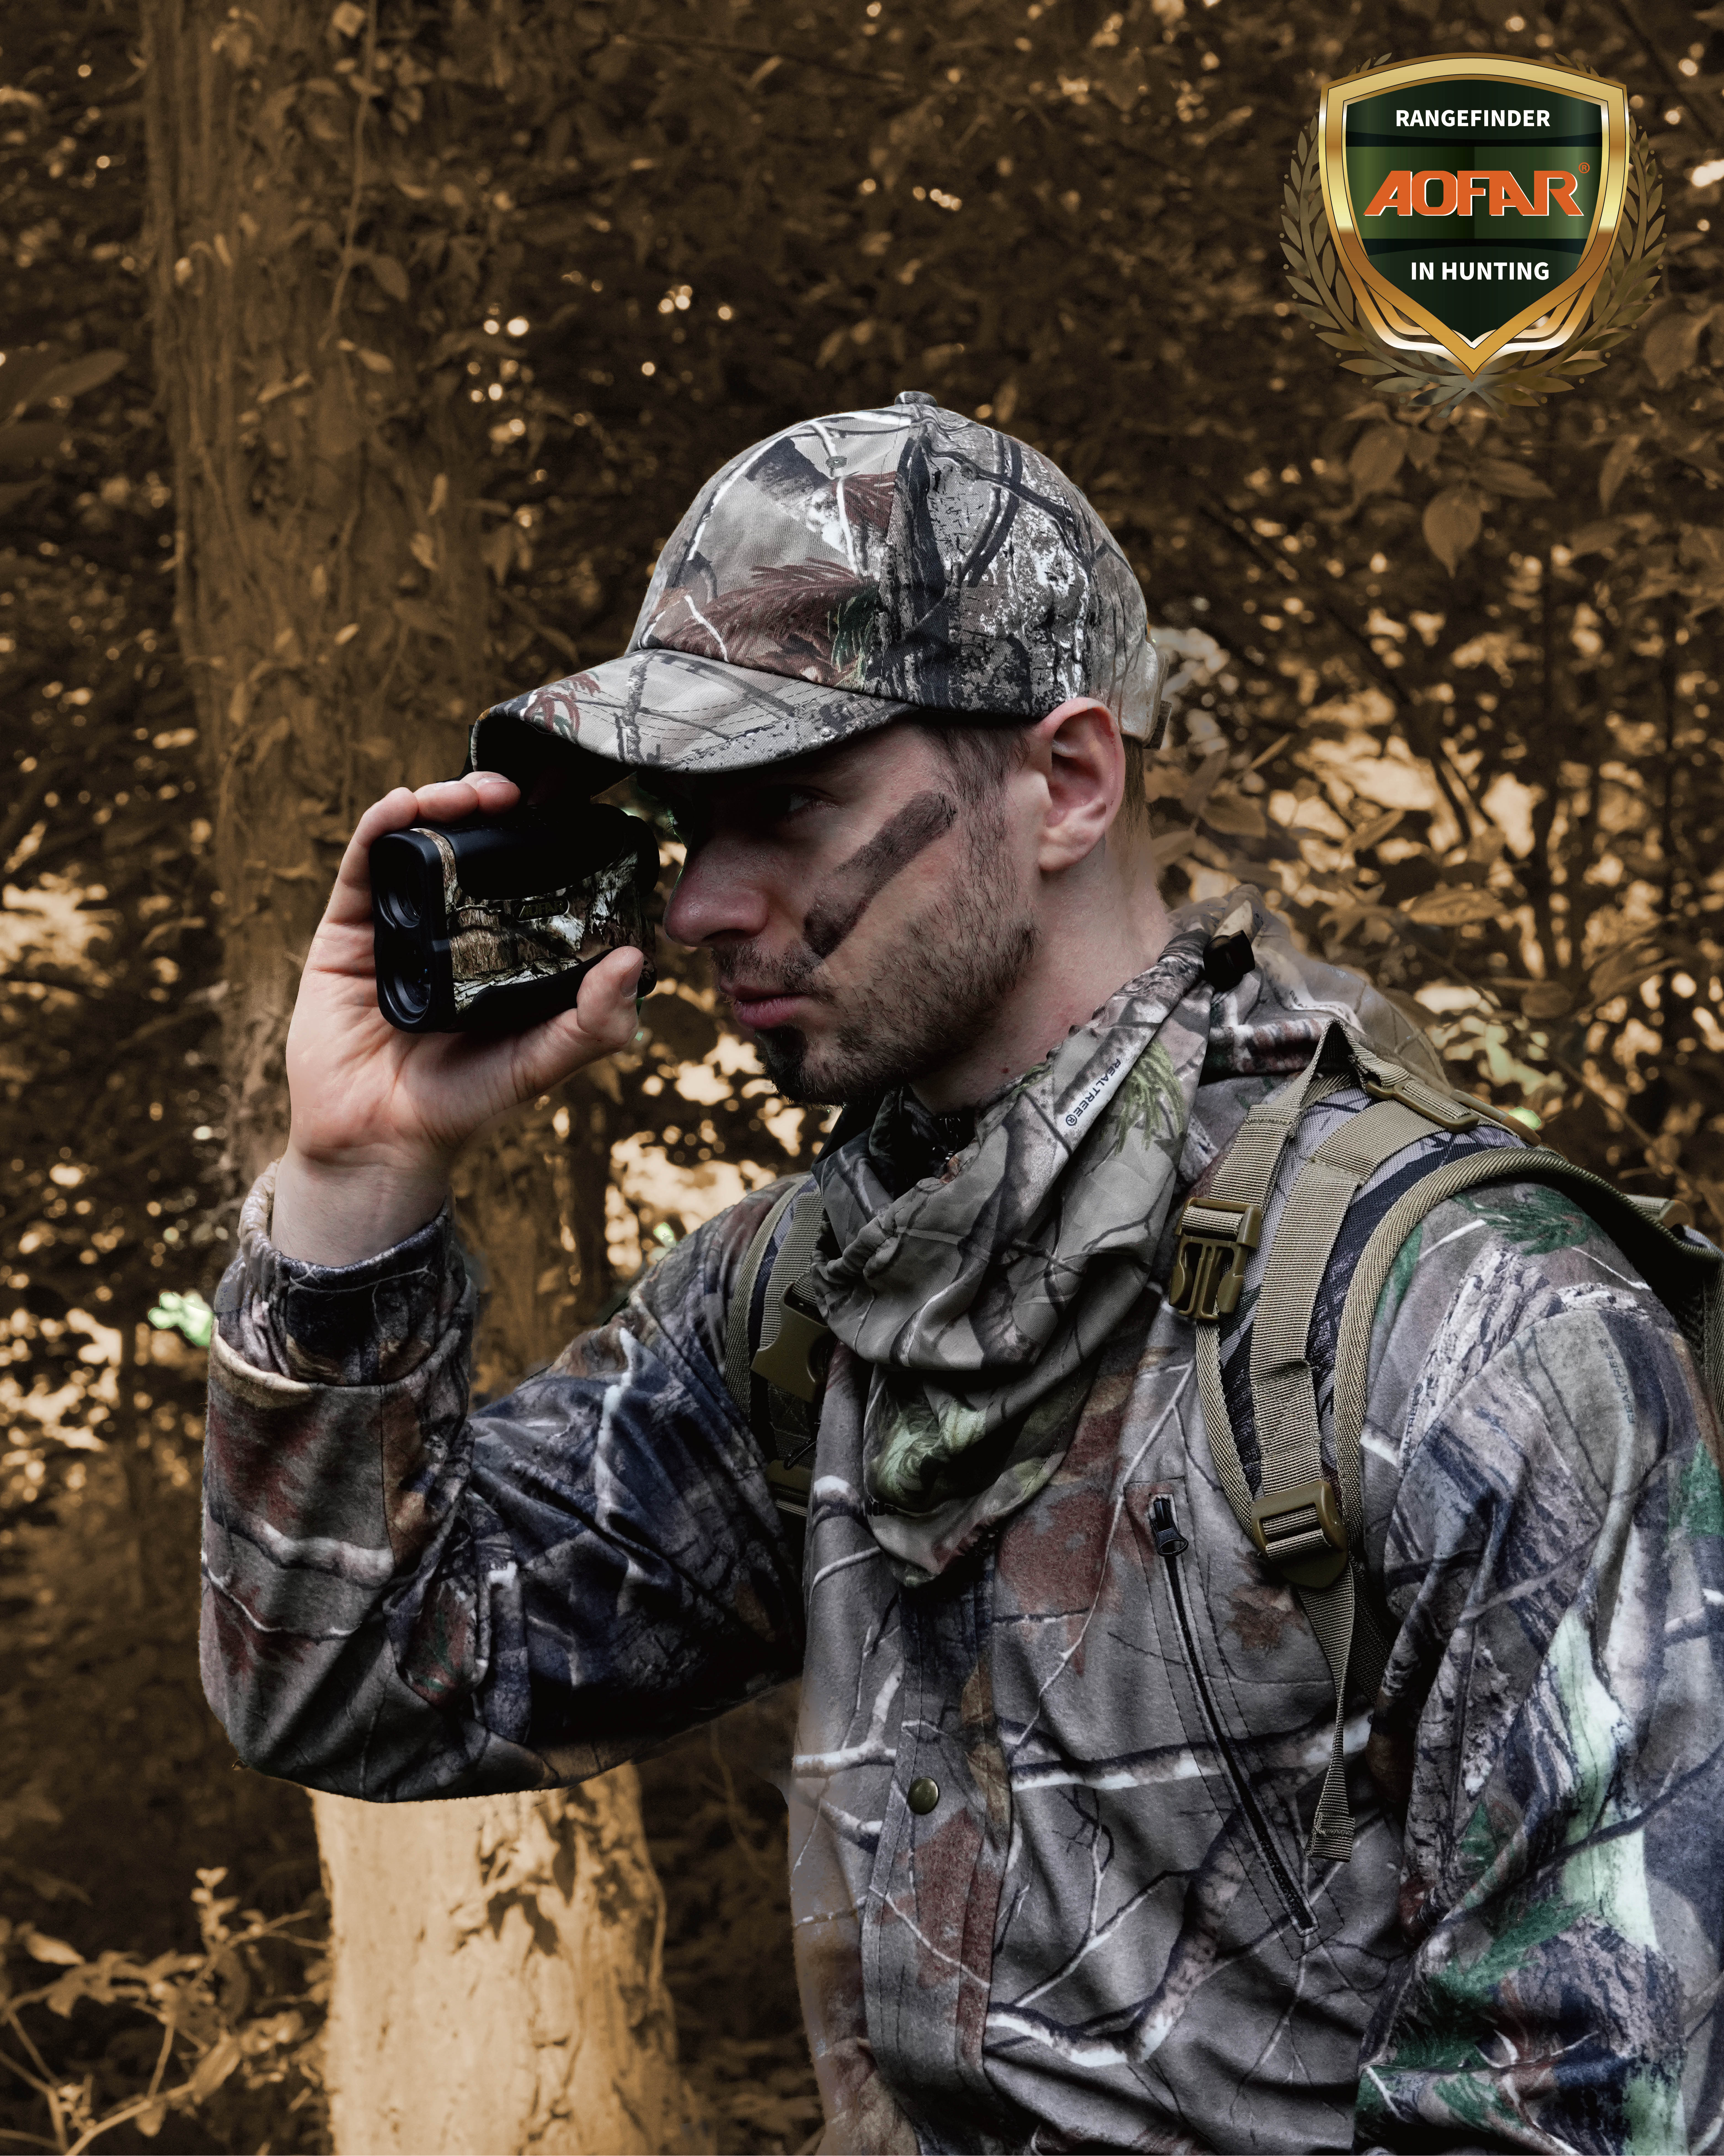 AOFAR Hunting Archery Range Finder HX-700N 700 Yards Waterproof Rangefinder for Bow Hunting with Range Scan Fog and Speed Mode, Free Battery, Carrying Case - image 3 of 6